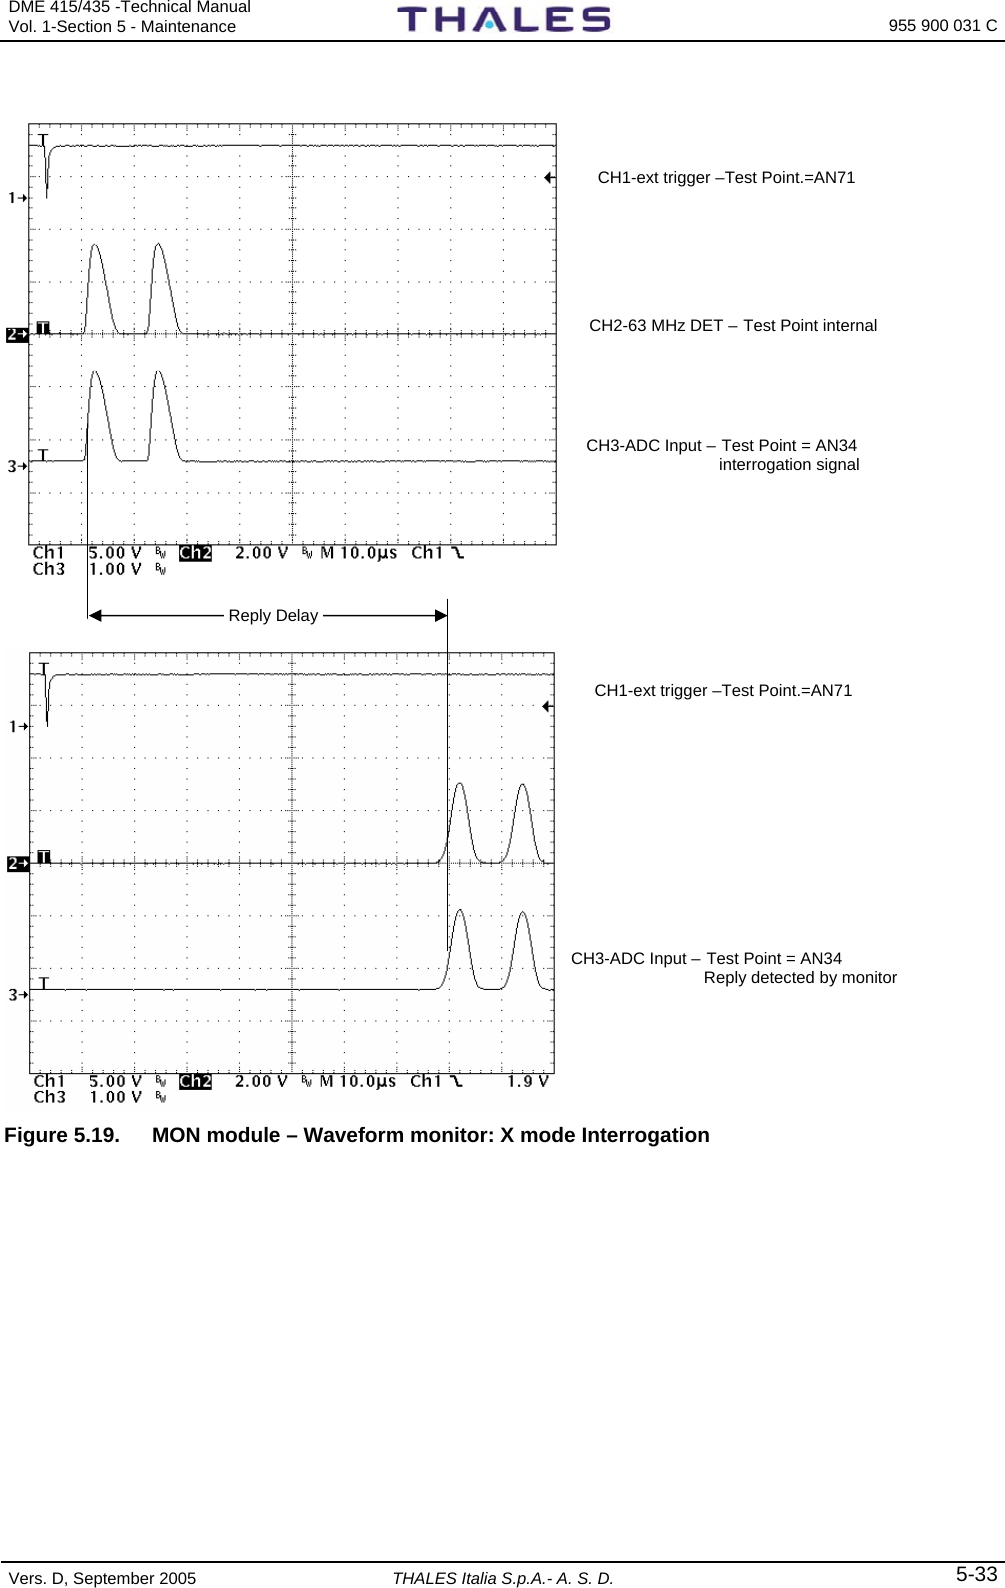 DME 415/435 -Technical Manual Vol. 1-Section 5 - Maintenance    955 900 031 C Vers. D, September 2005  THALES Italia S.p.A.- A. S. D. 5-33       Figure 5.19.  MON module – Waveform monitor: X mode Interrogation       CH1-ext trigger –Test Point.=AN71  CH2-63 MHz DET – Test Point internal CH3-ADC Input – Test Point = AN34  interrogation signal CH1-ext trigger –Test Point.=AN71  CH3-ADC Input – Test Point = AN34   Reply detected by monitor   Reply Delay 